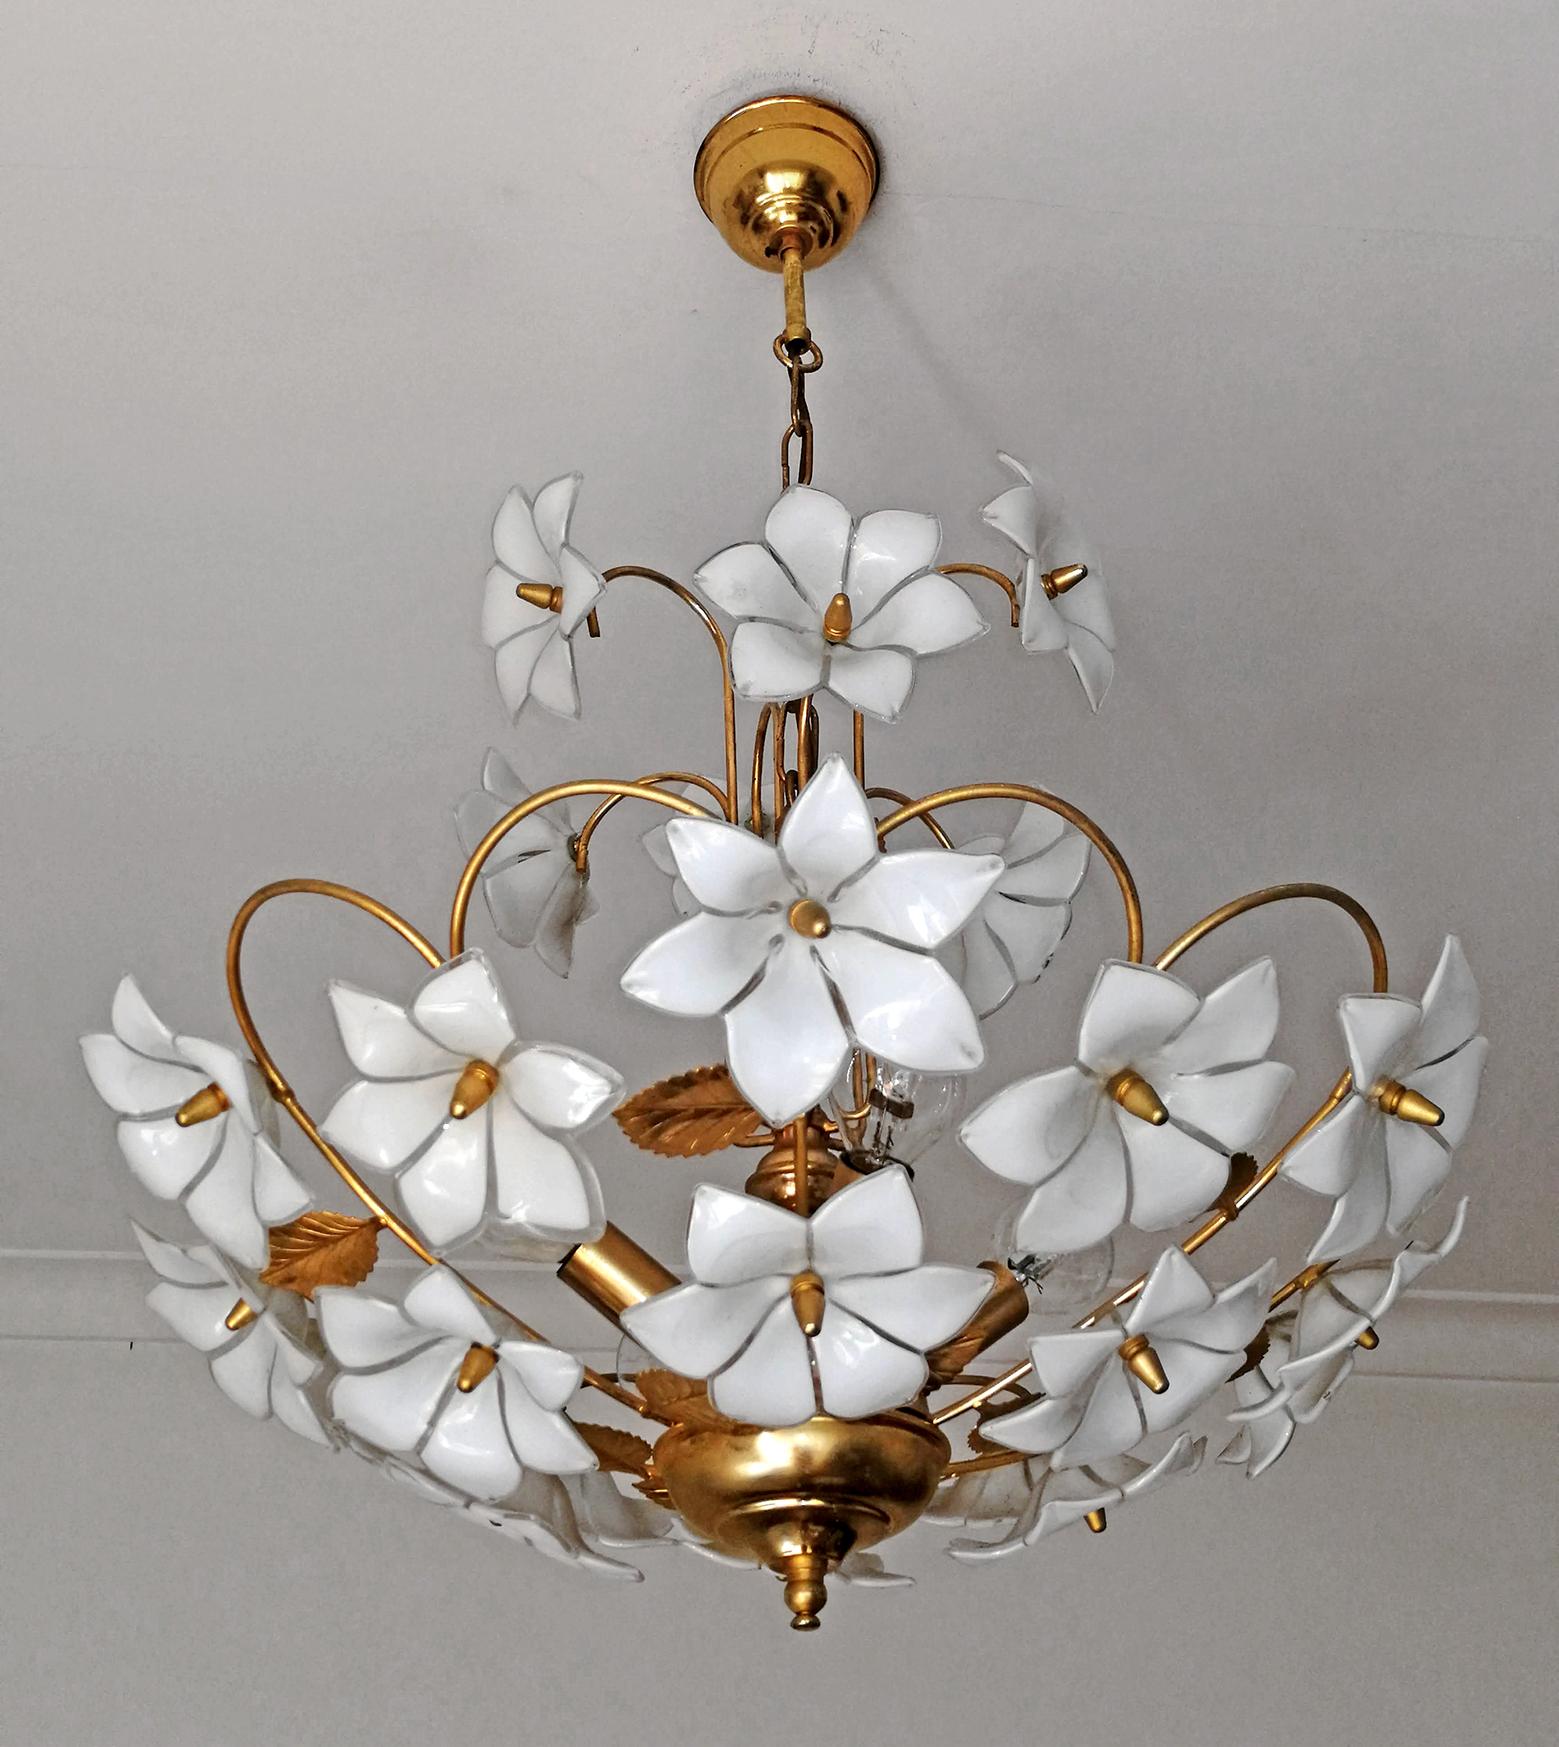 1960s vintage Italian Murano Venini style flower bouquet art-glass/ 24 hand-blow white and clear glass flowers and gold-plated brass.
Measures:
Diameter 22 in/ 55 cm
Height 30 in/ 75 cm
Weight: 11 lb/5 Kg
Four light bulbs E14/ 60 W, good working